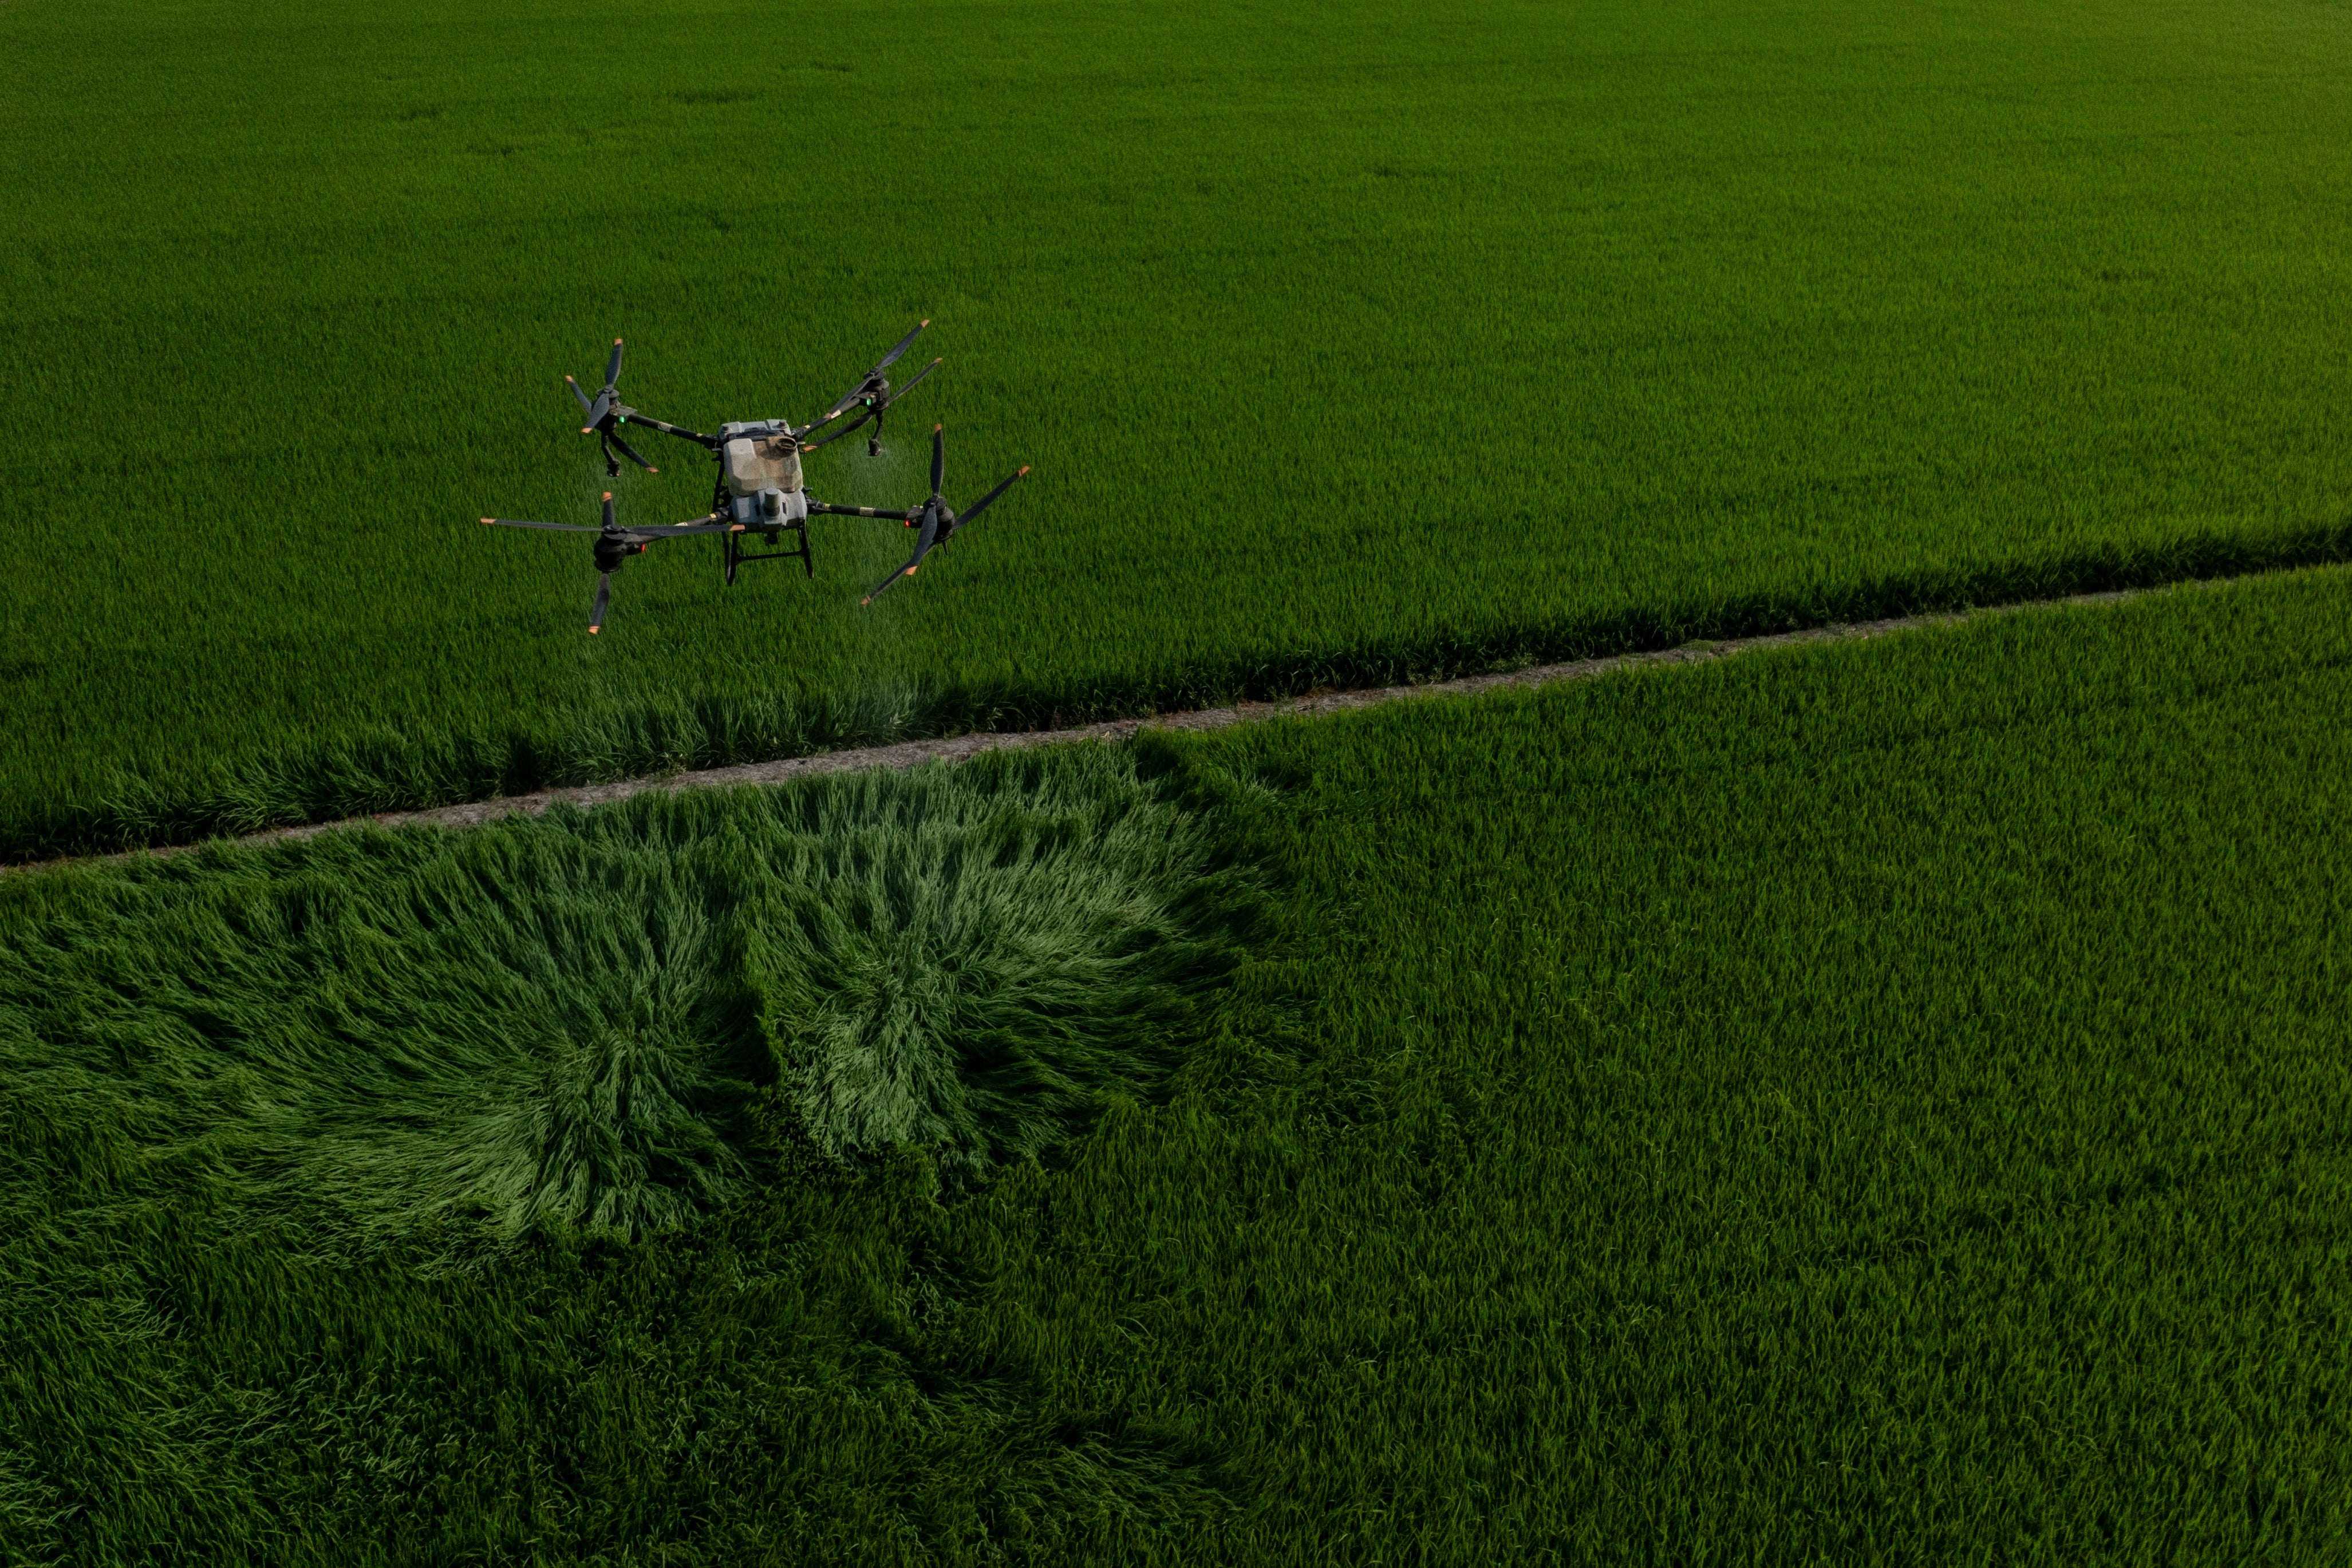 A large drone carrying fertilizer flies over Vo Van Van’蝉 rice fields in Long An province in southern Vietnam